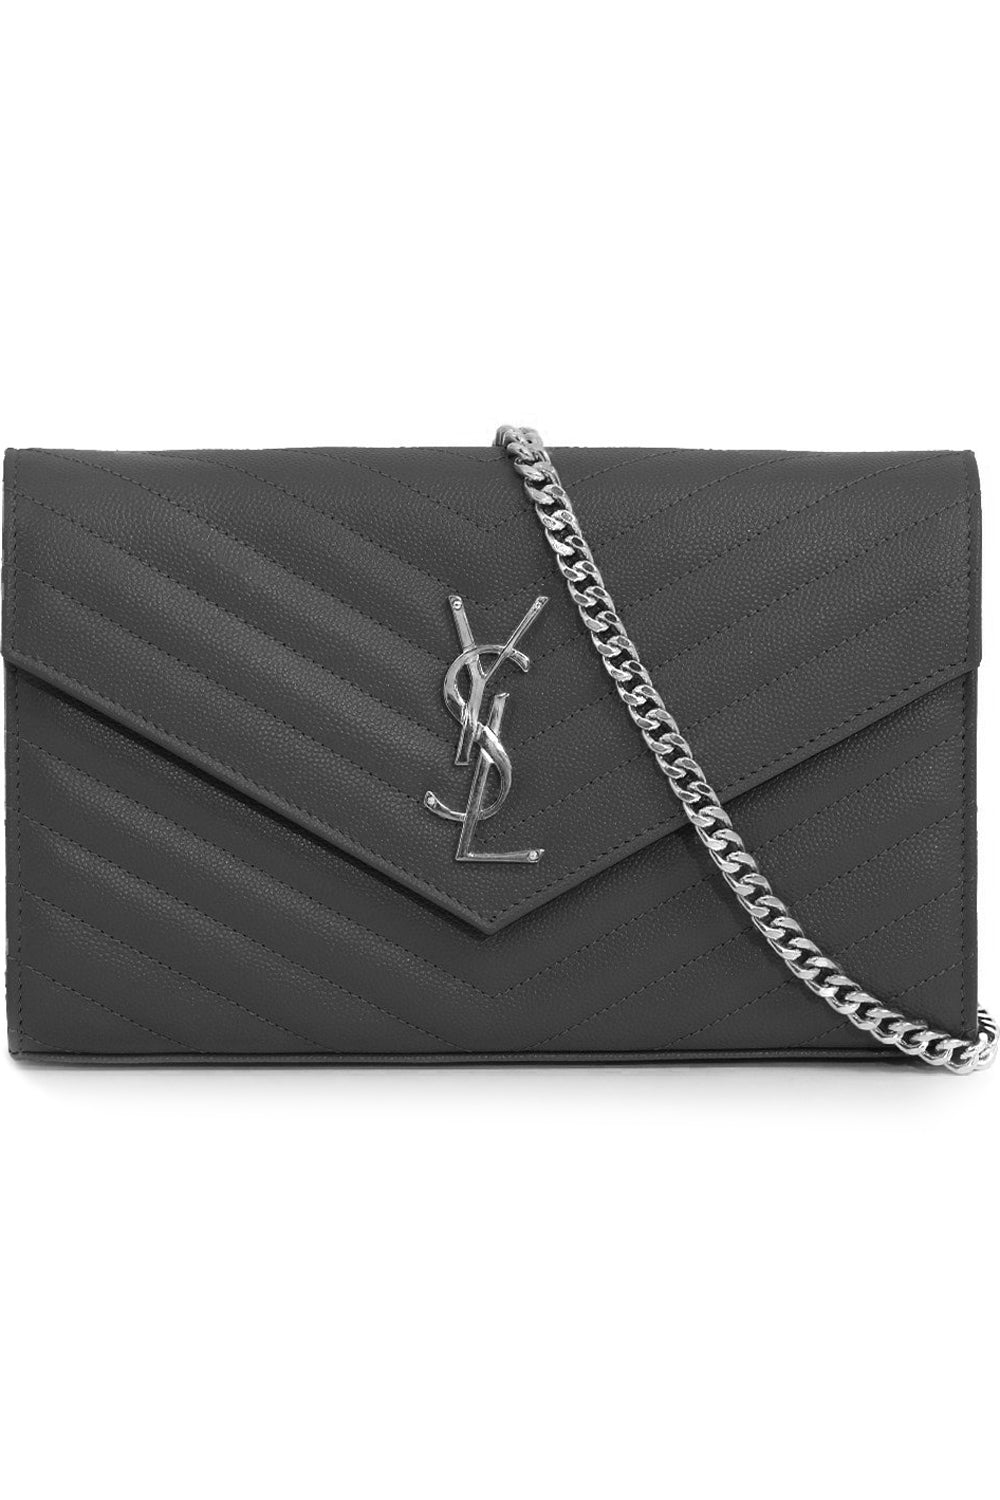 SAINT LAURENT BAGS MULTI MONOGRAMME QUILTED CHAIN WALLET | STORM/SILVER